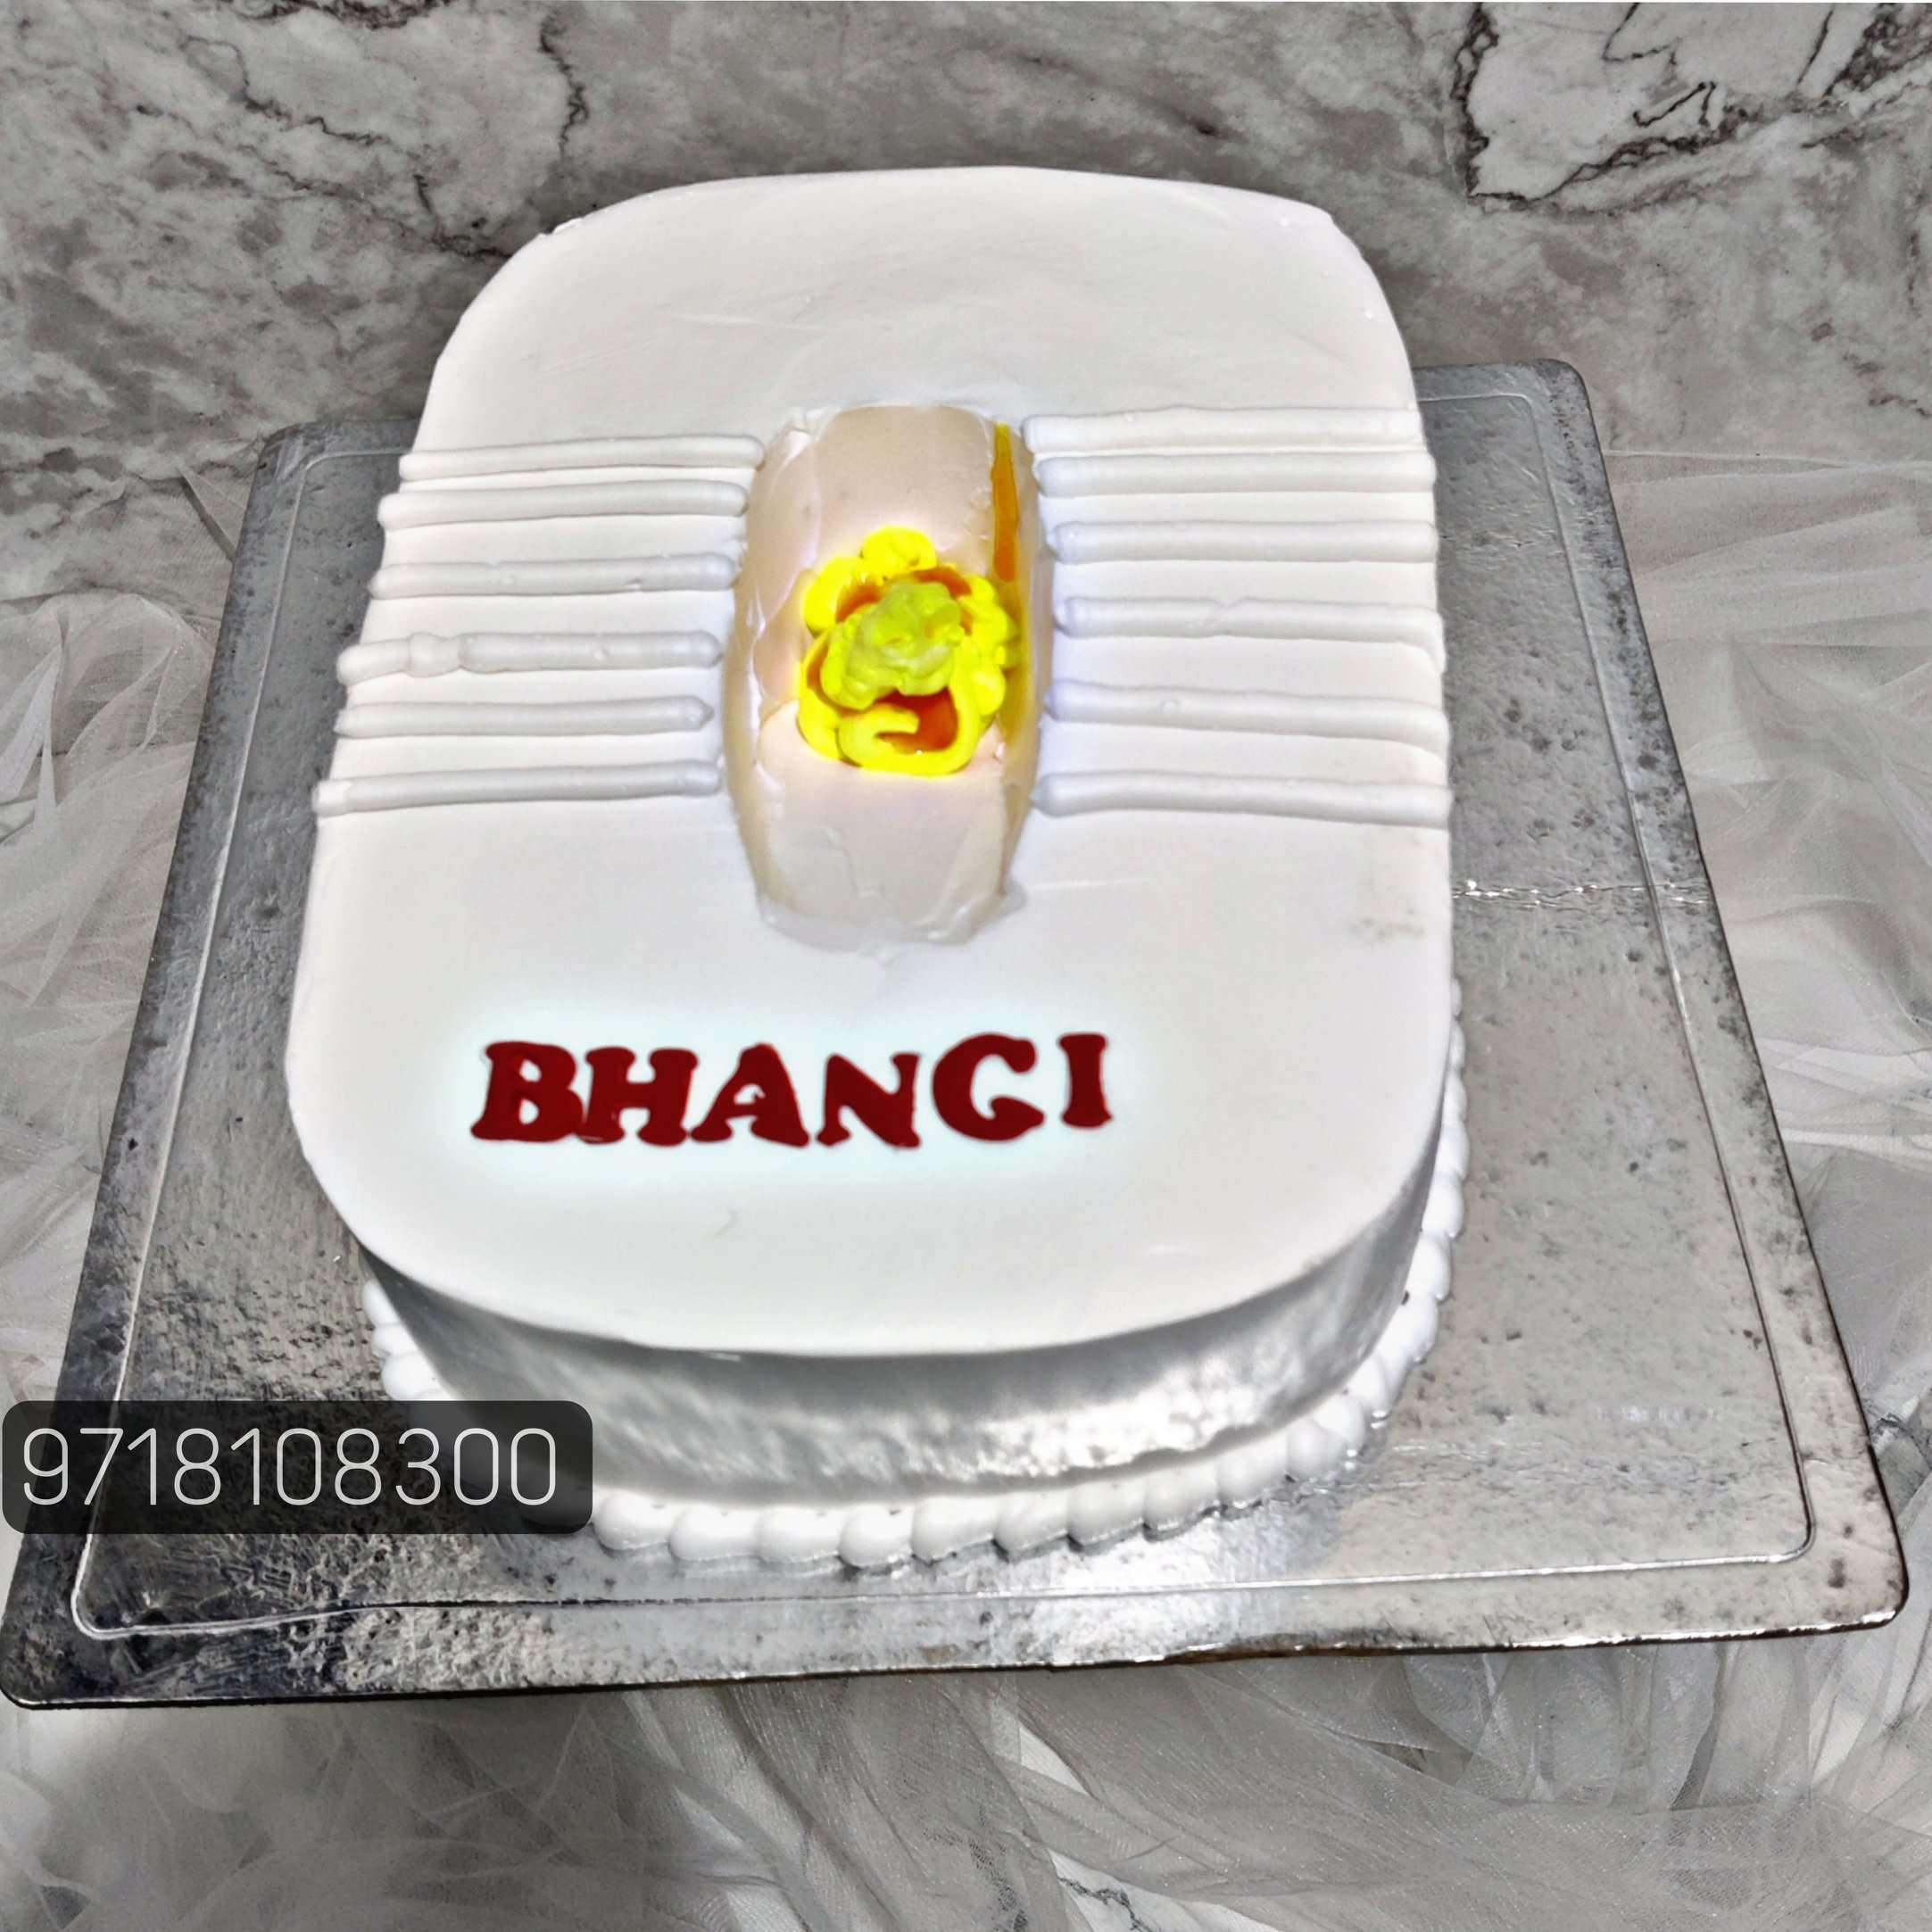 Top Cake Delivery Services in Bhanpur - Best Online Cake Delivery Services  - Justdial